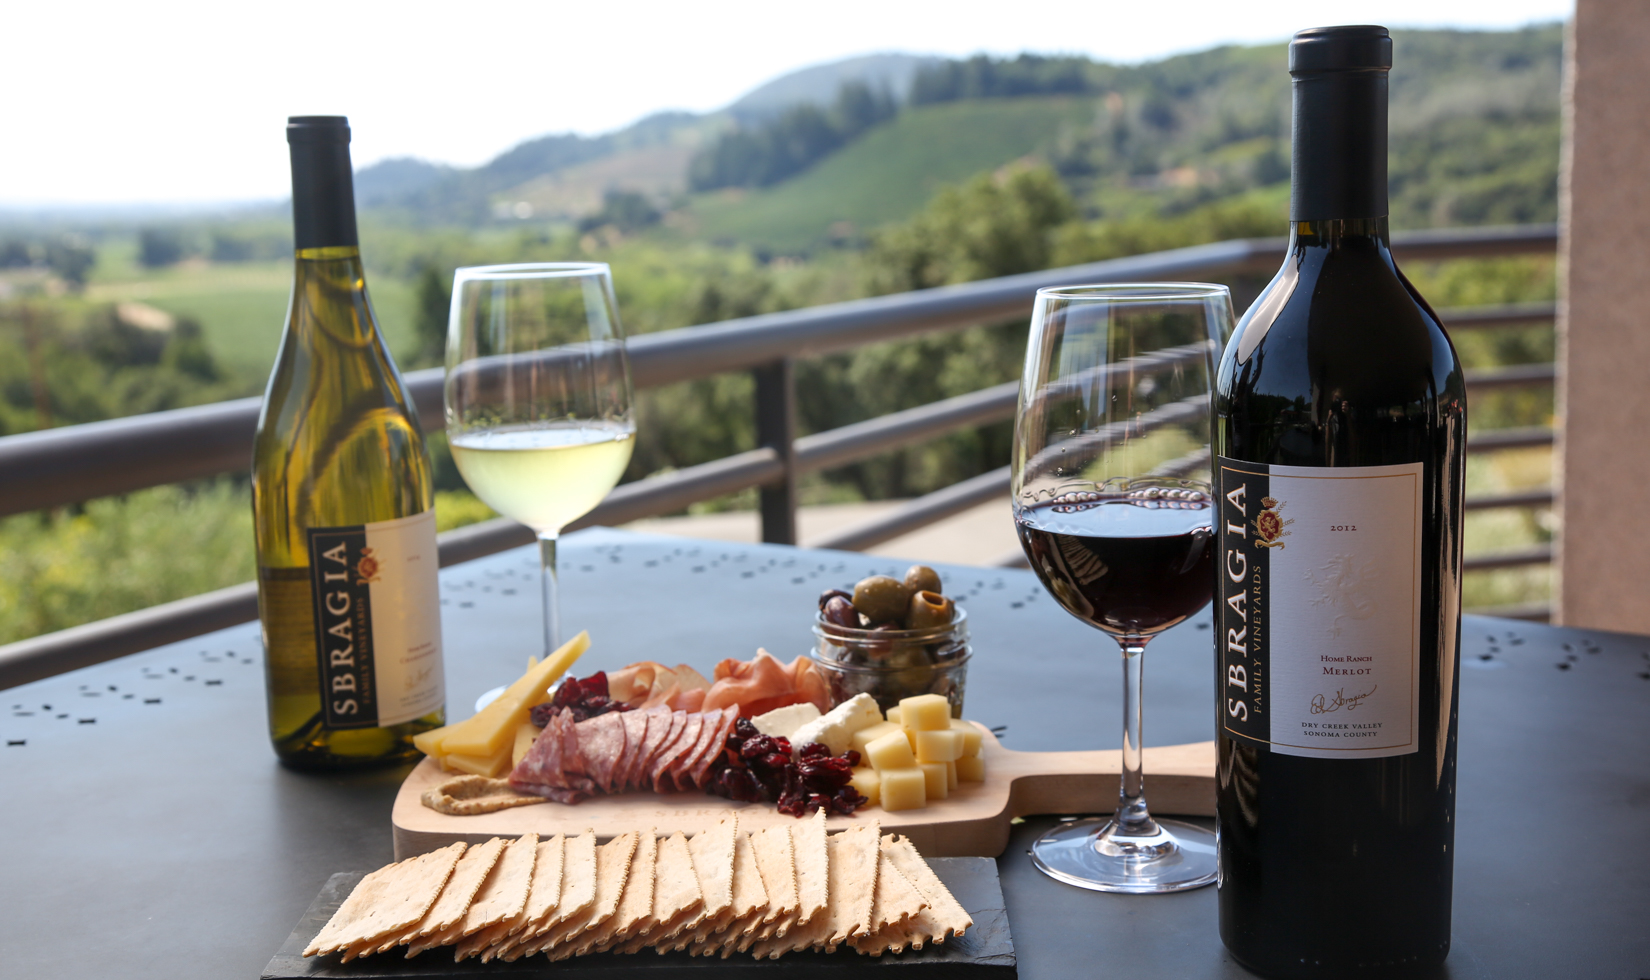 At Sbragia, their charcuterie wine pairings come with a magnificent view 